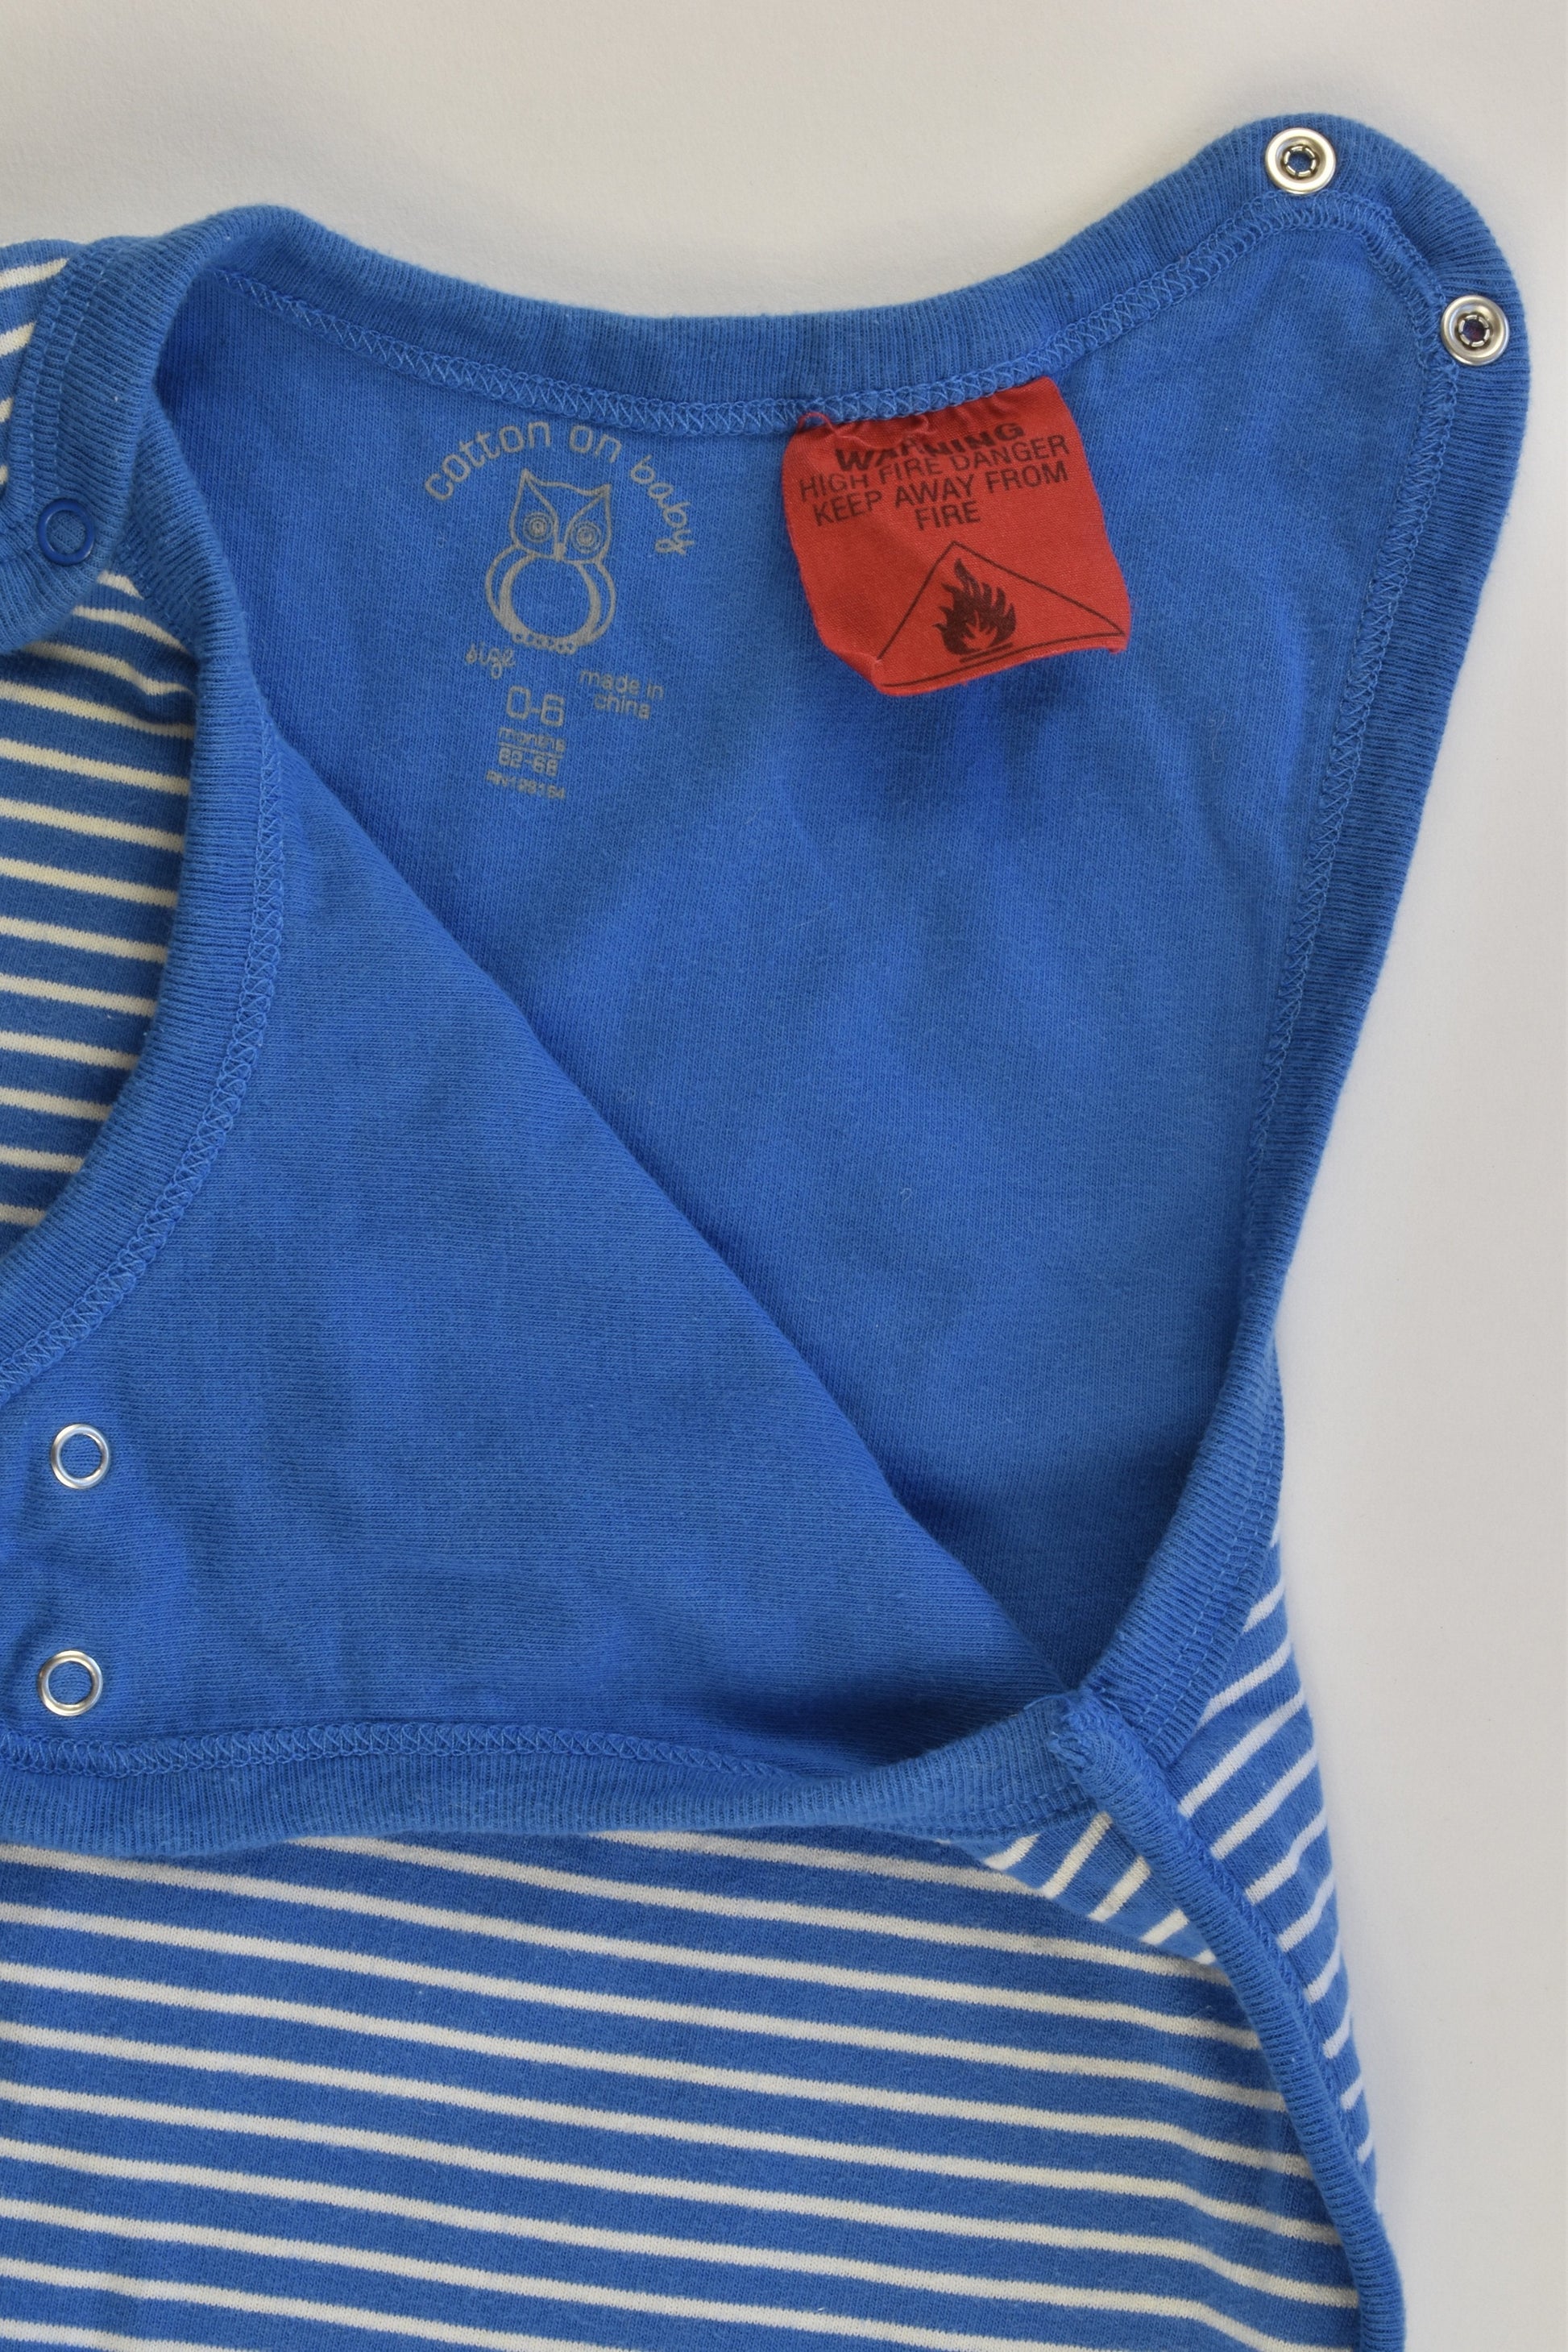 Cotton On Baby Size 0-6 months Approx 1.0 TOG Striped Sleeping Bag